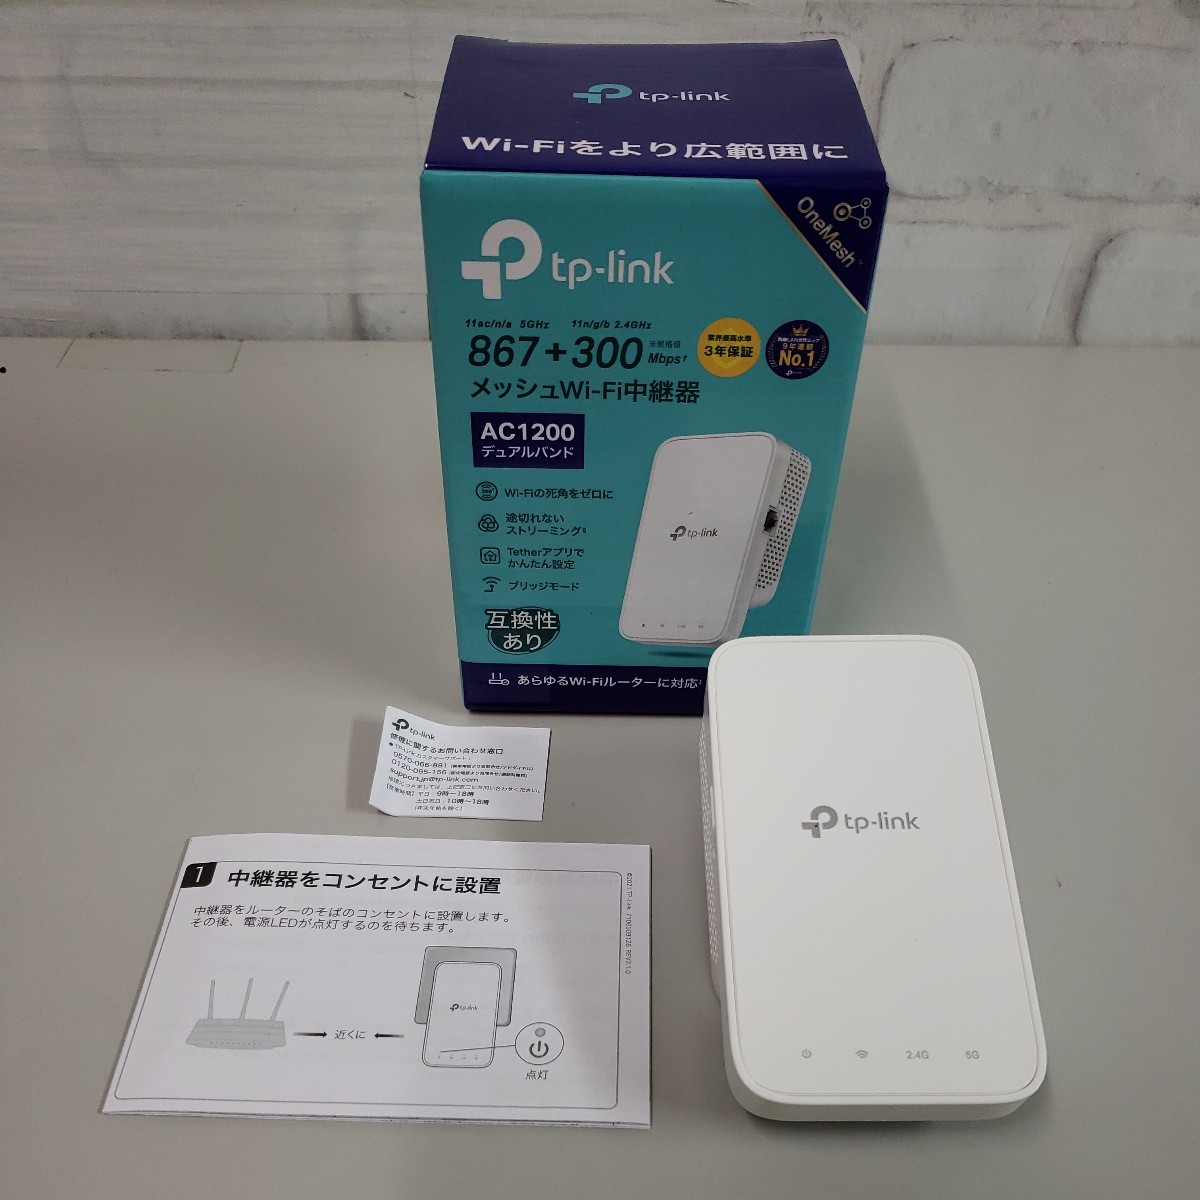 602y0710★TP-Link WiFi 無線LAN 中継機 Wi-Fi 5 11ac AC1200 866+300Mbps Wi-Fi中継機 コンパクト コンセント RE330の画像1